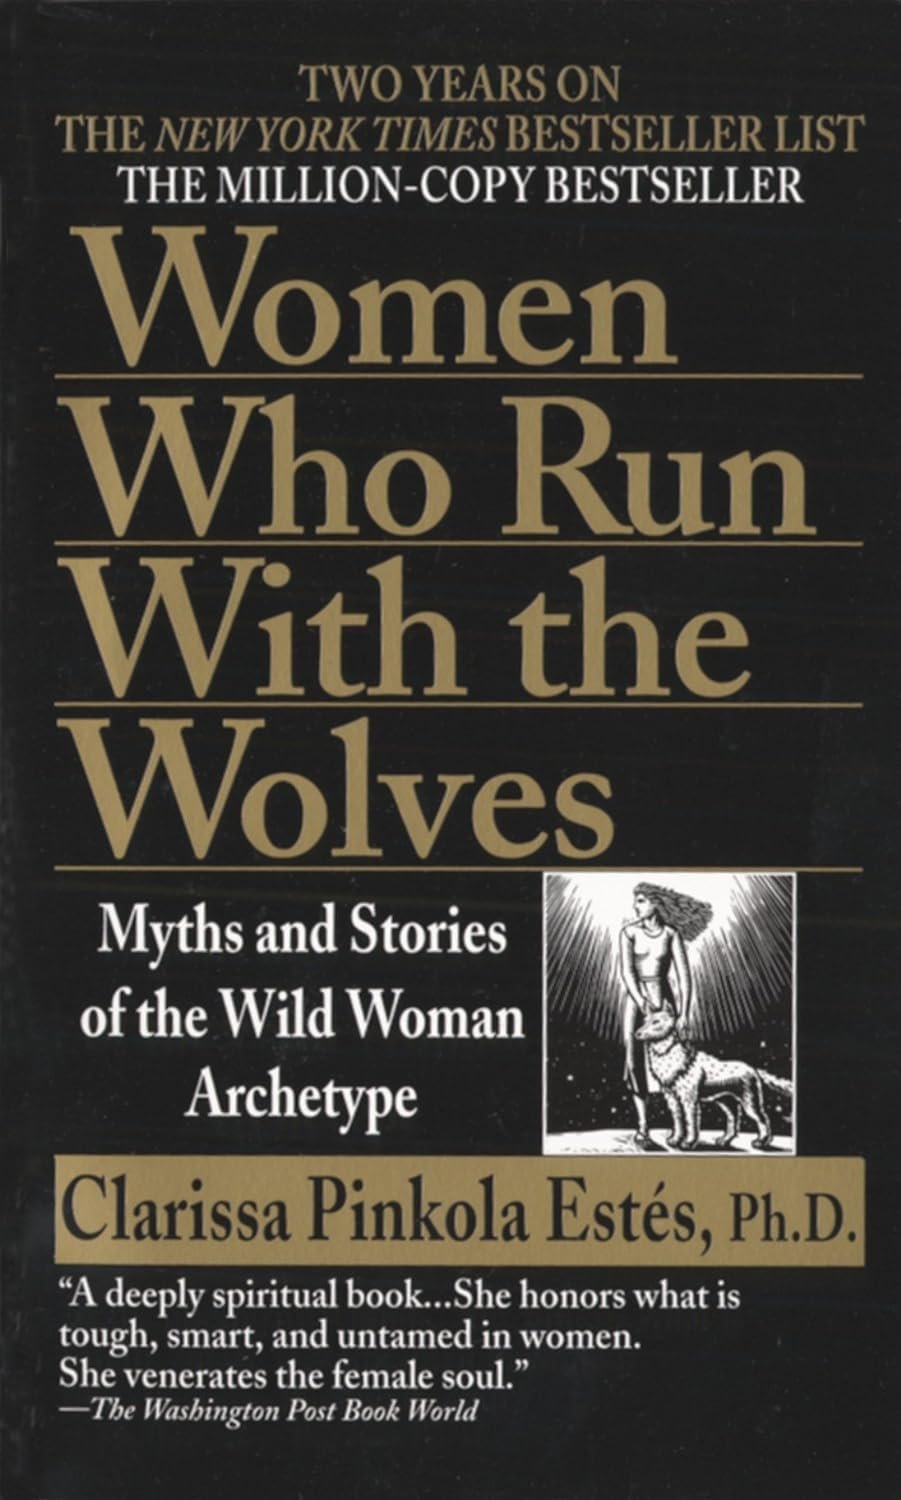 women who run with the wolves.jpg